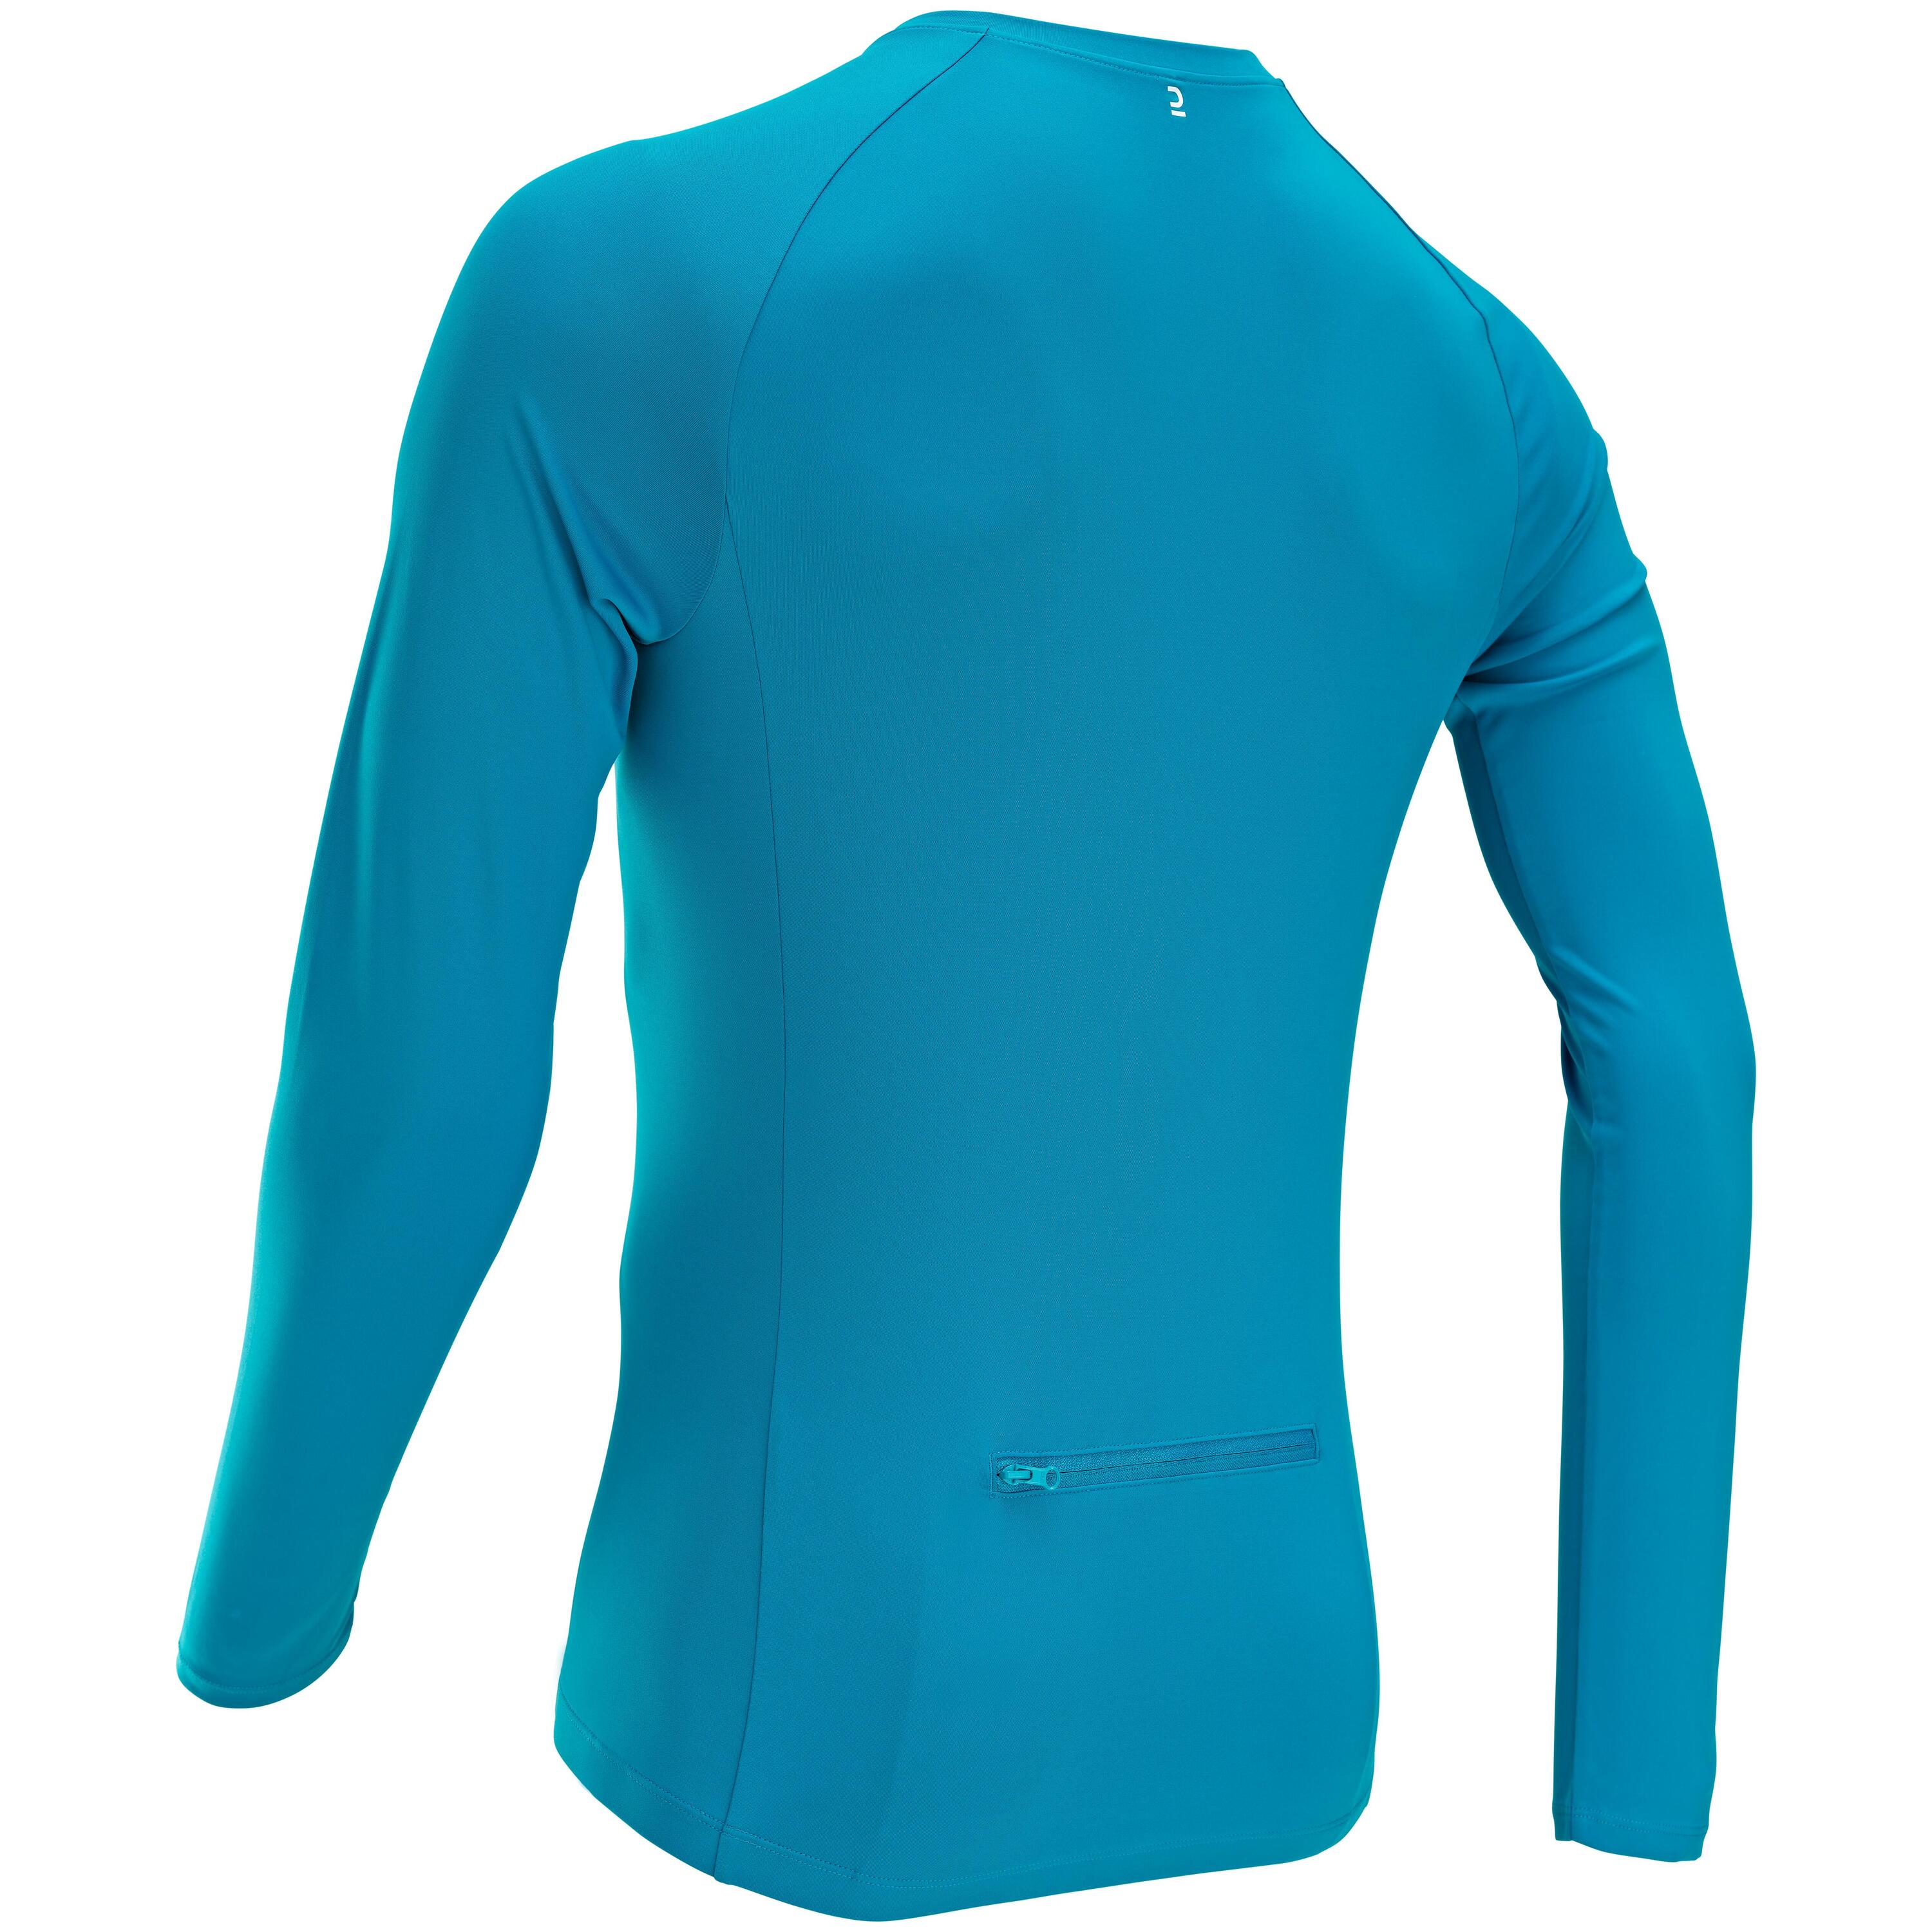 Men's Anti-UV Long-Sleeved Road Cycling Summer Jersey Essential - Blue 3/7